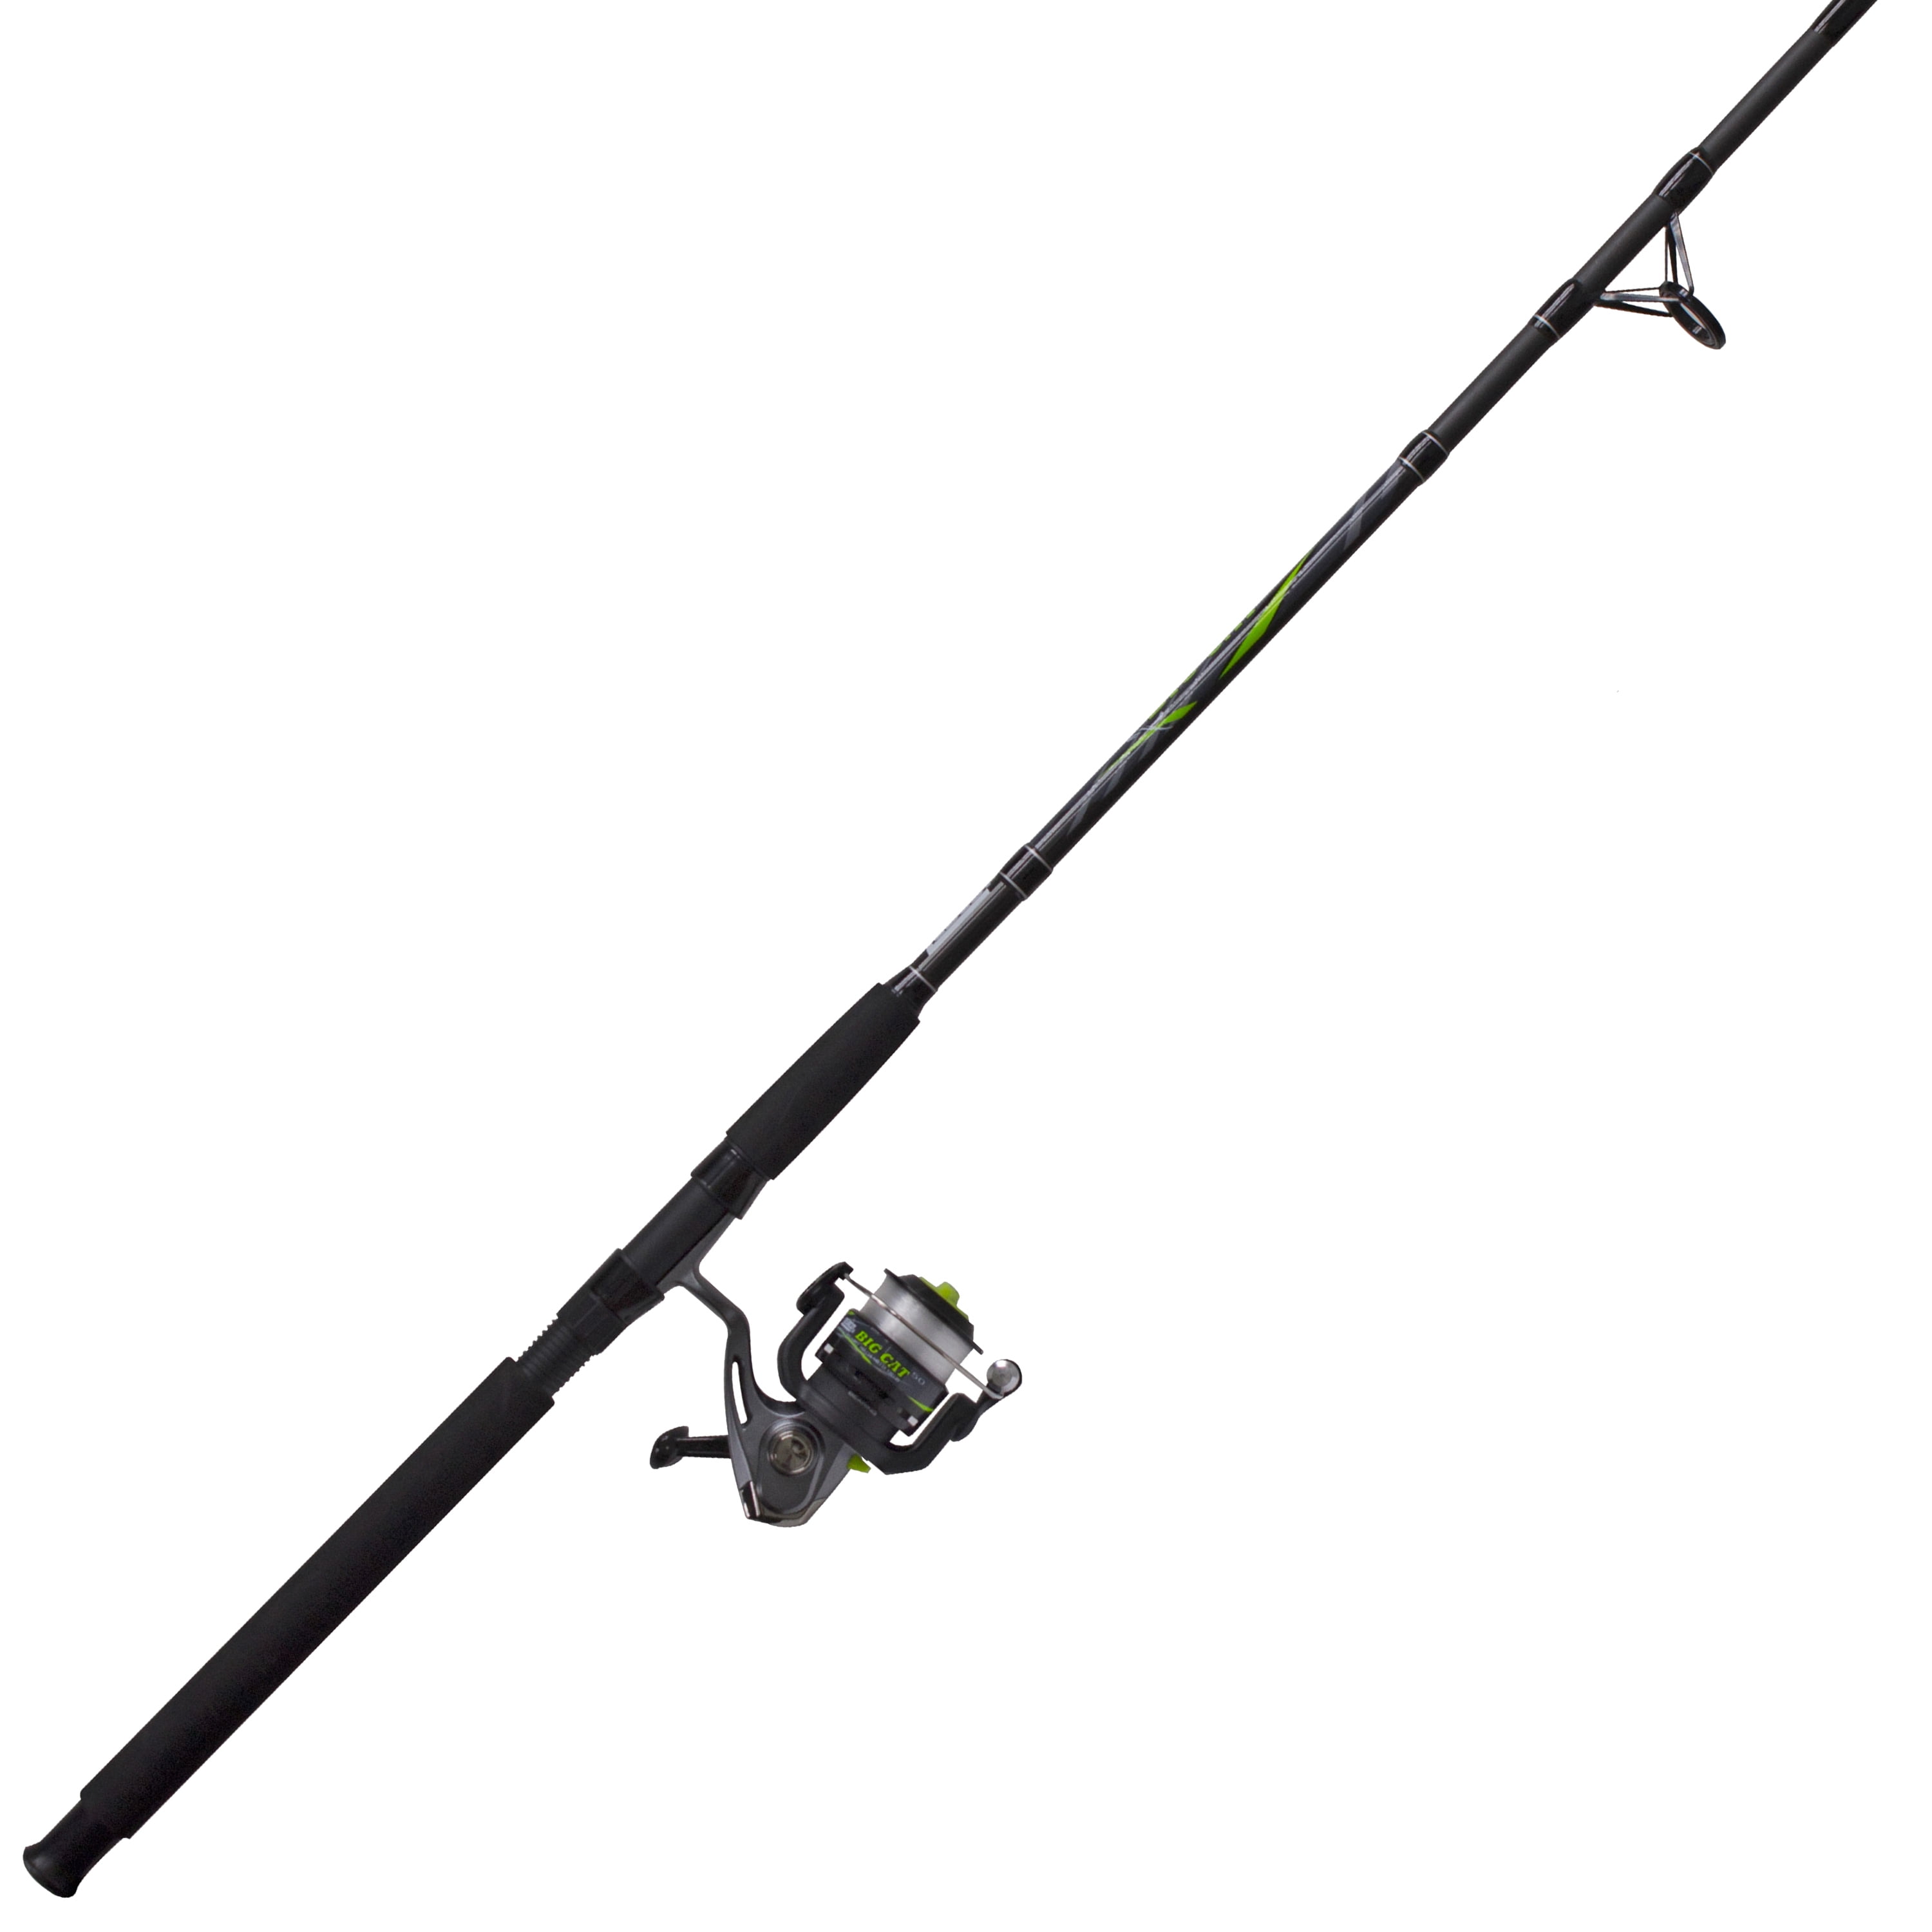 Zebco Big Cat Spinnging Reel and Fishing Rod Combo, Size 60 Reel, 9-Foot  2-Piece Mediuam-Heavy Pole, Pre-Spooled with 20-Pound Fishing Line,  Silver/Black 